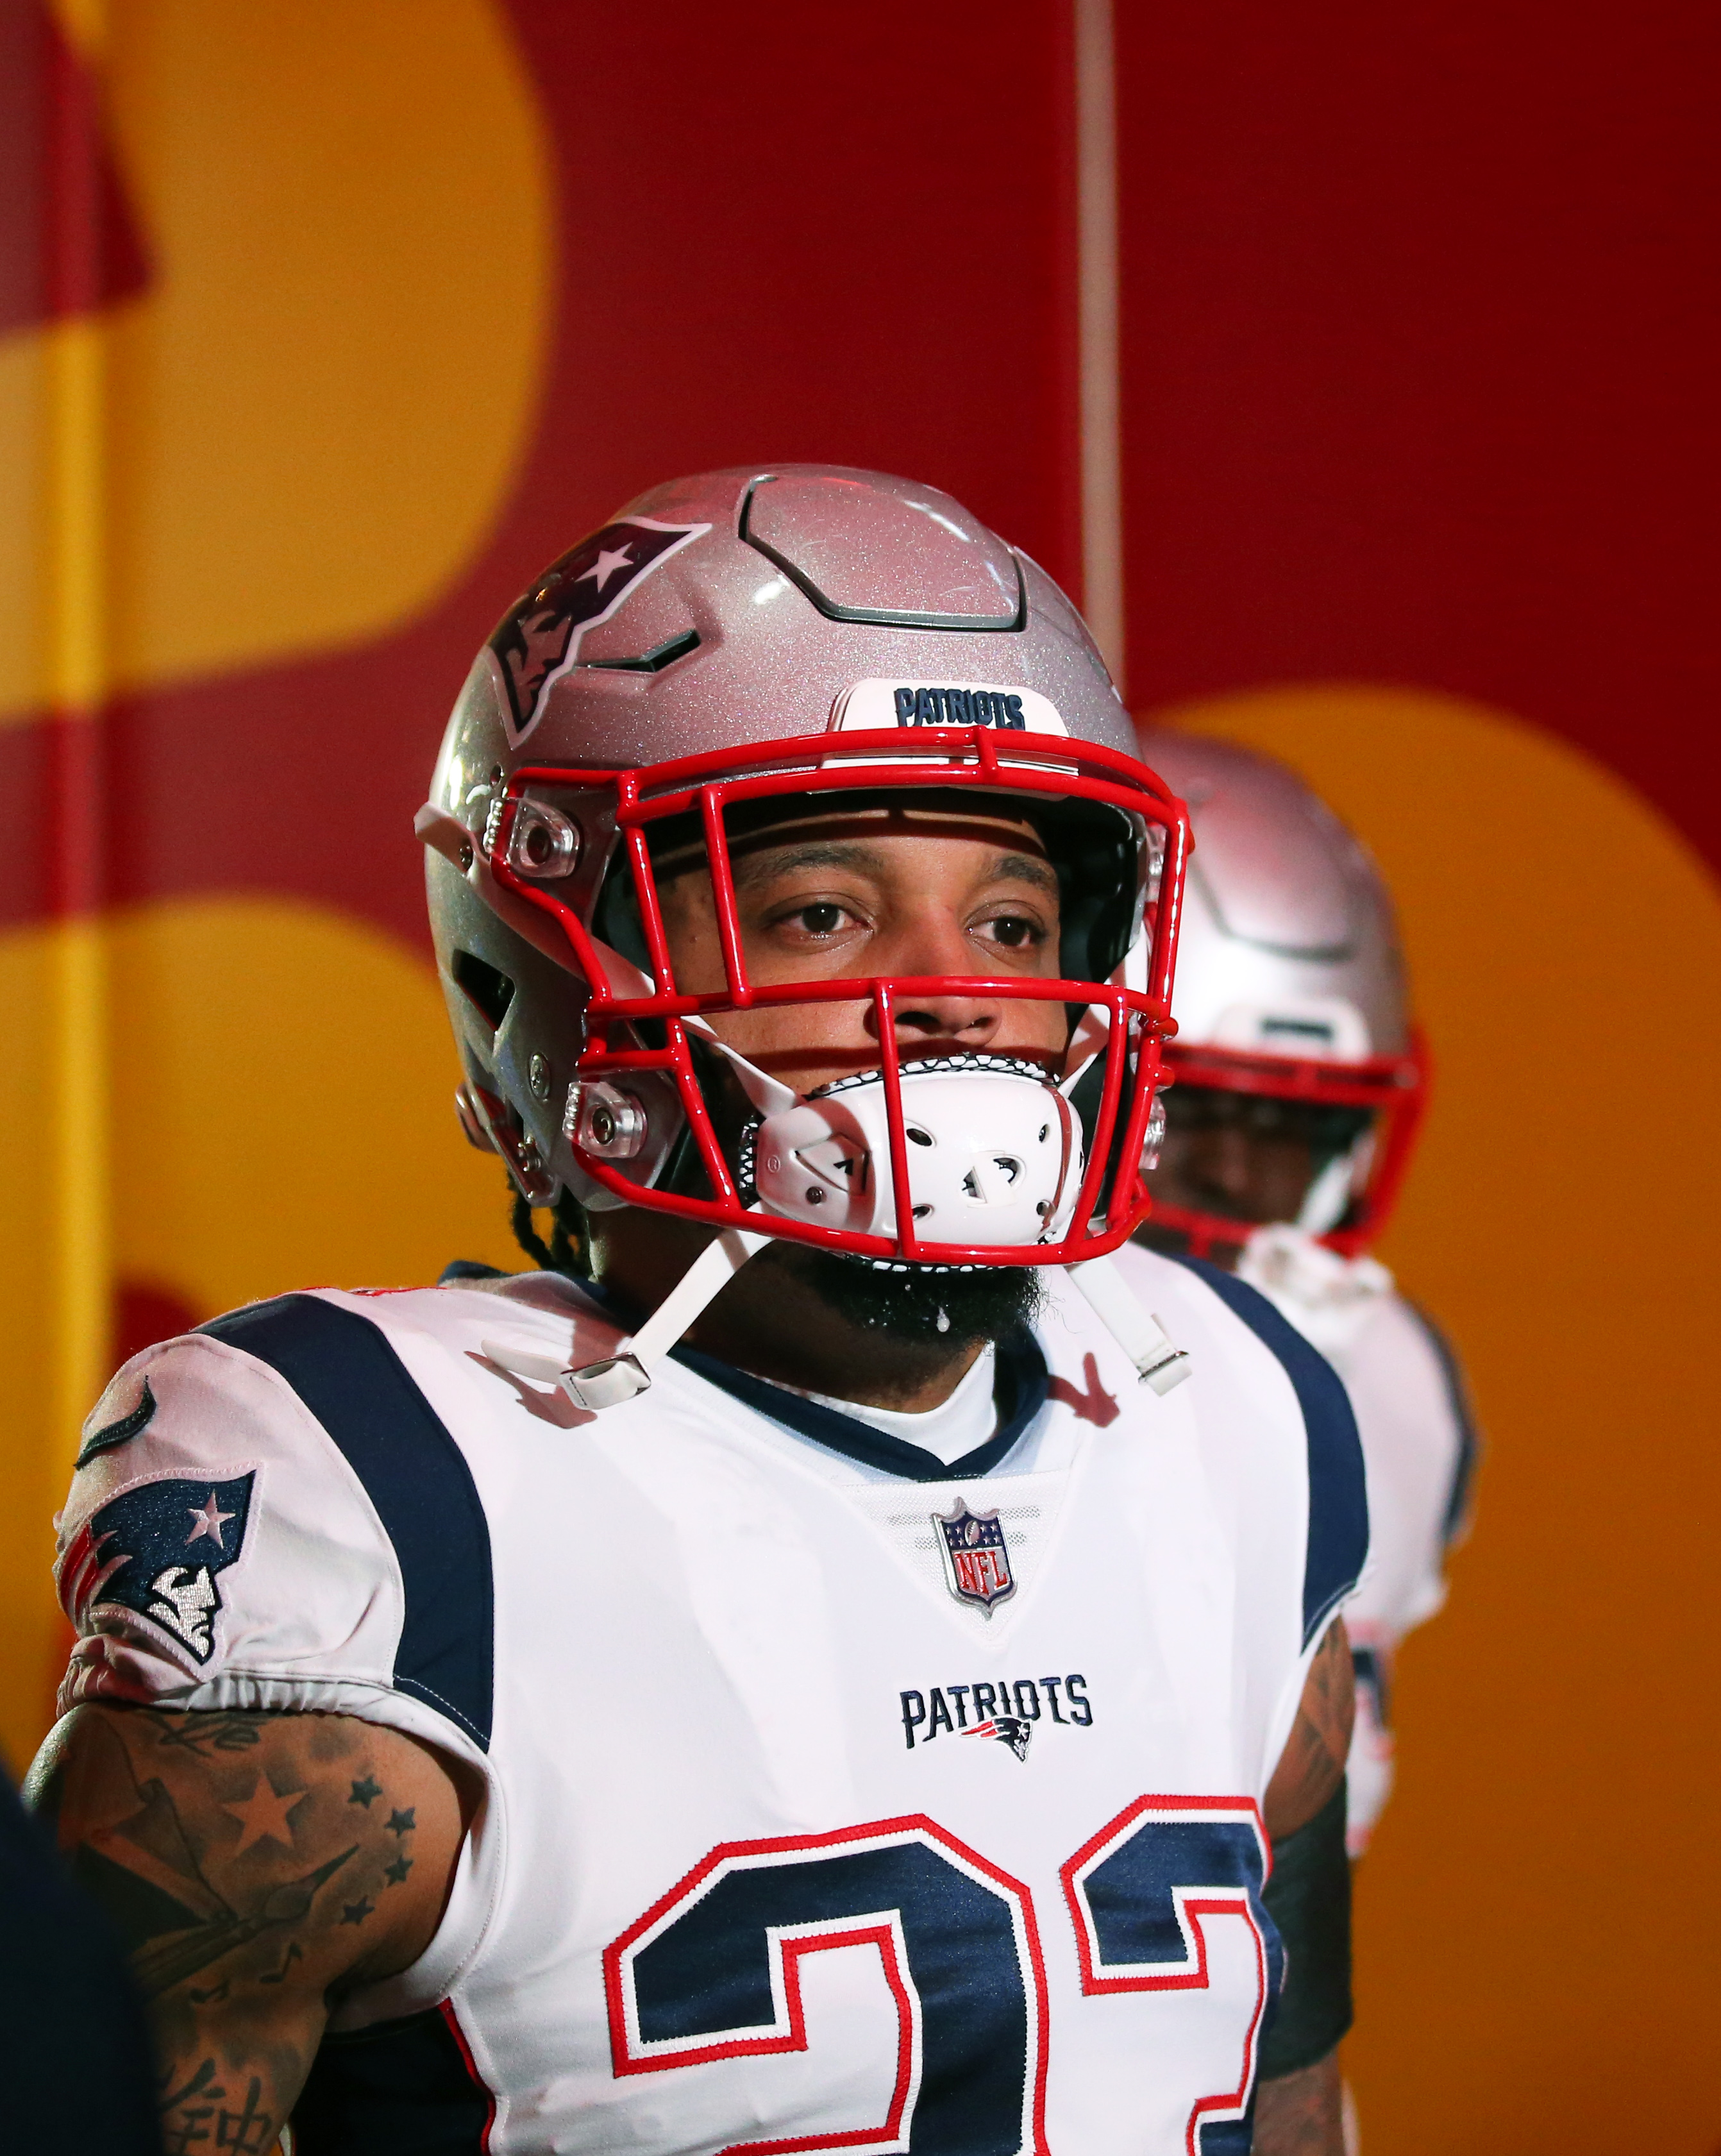 Patrick Chung To Sign Extension With Patriots